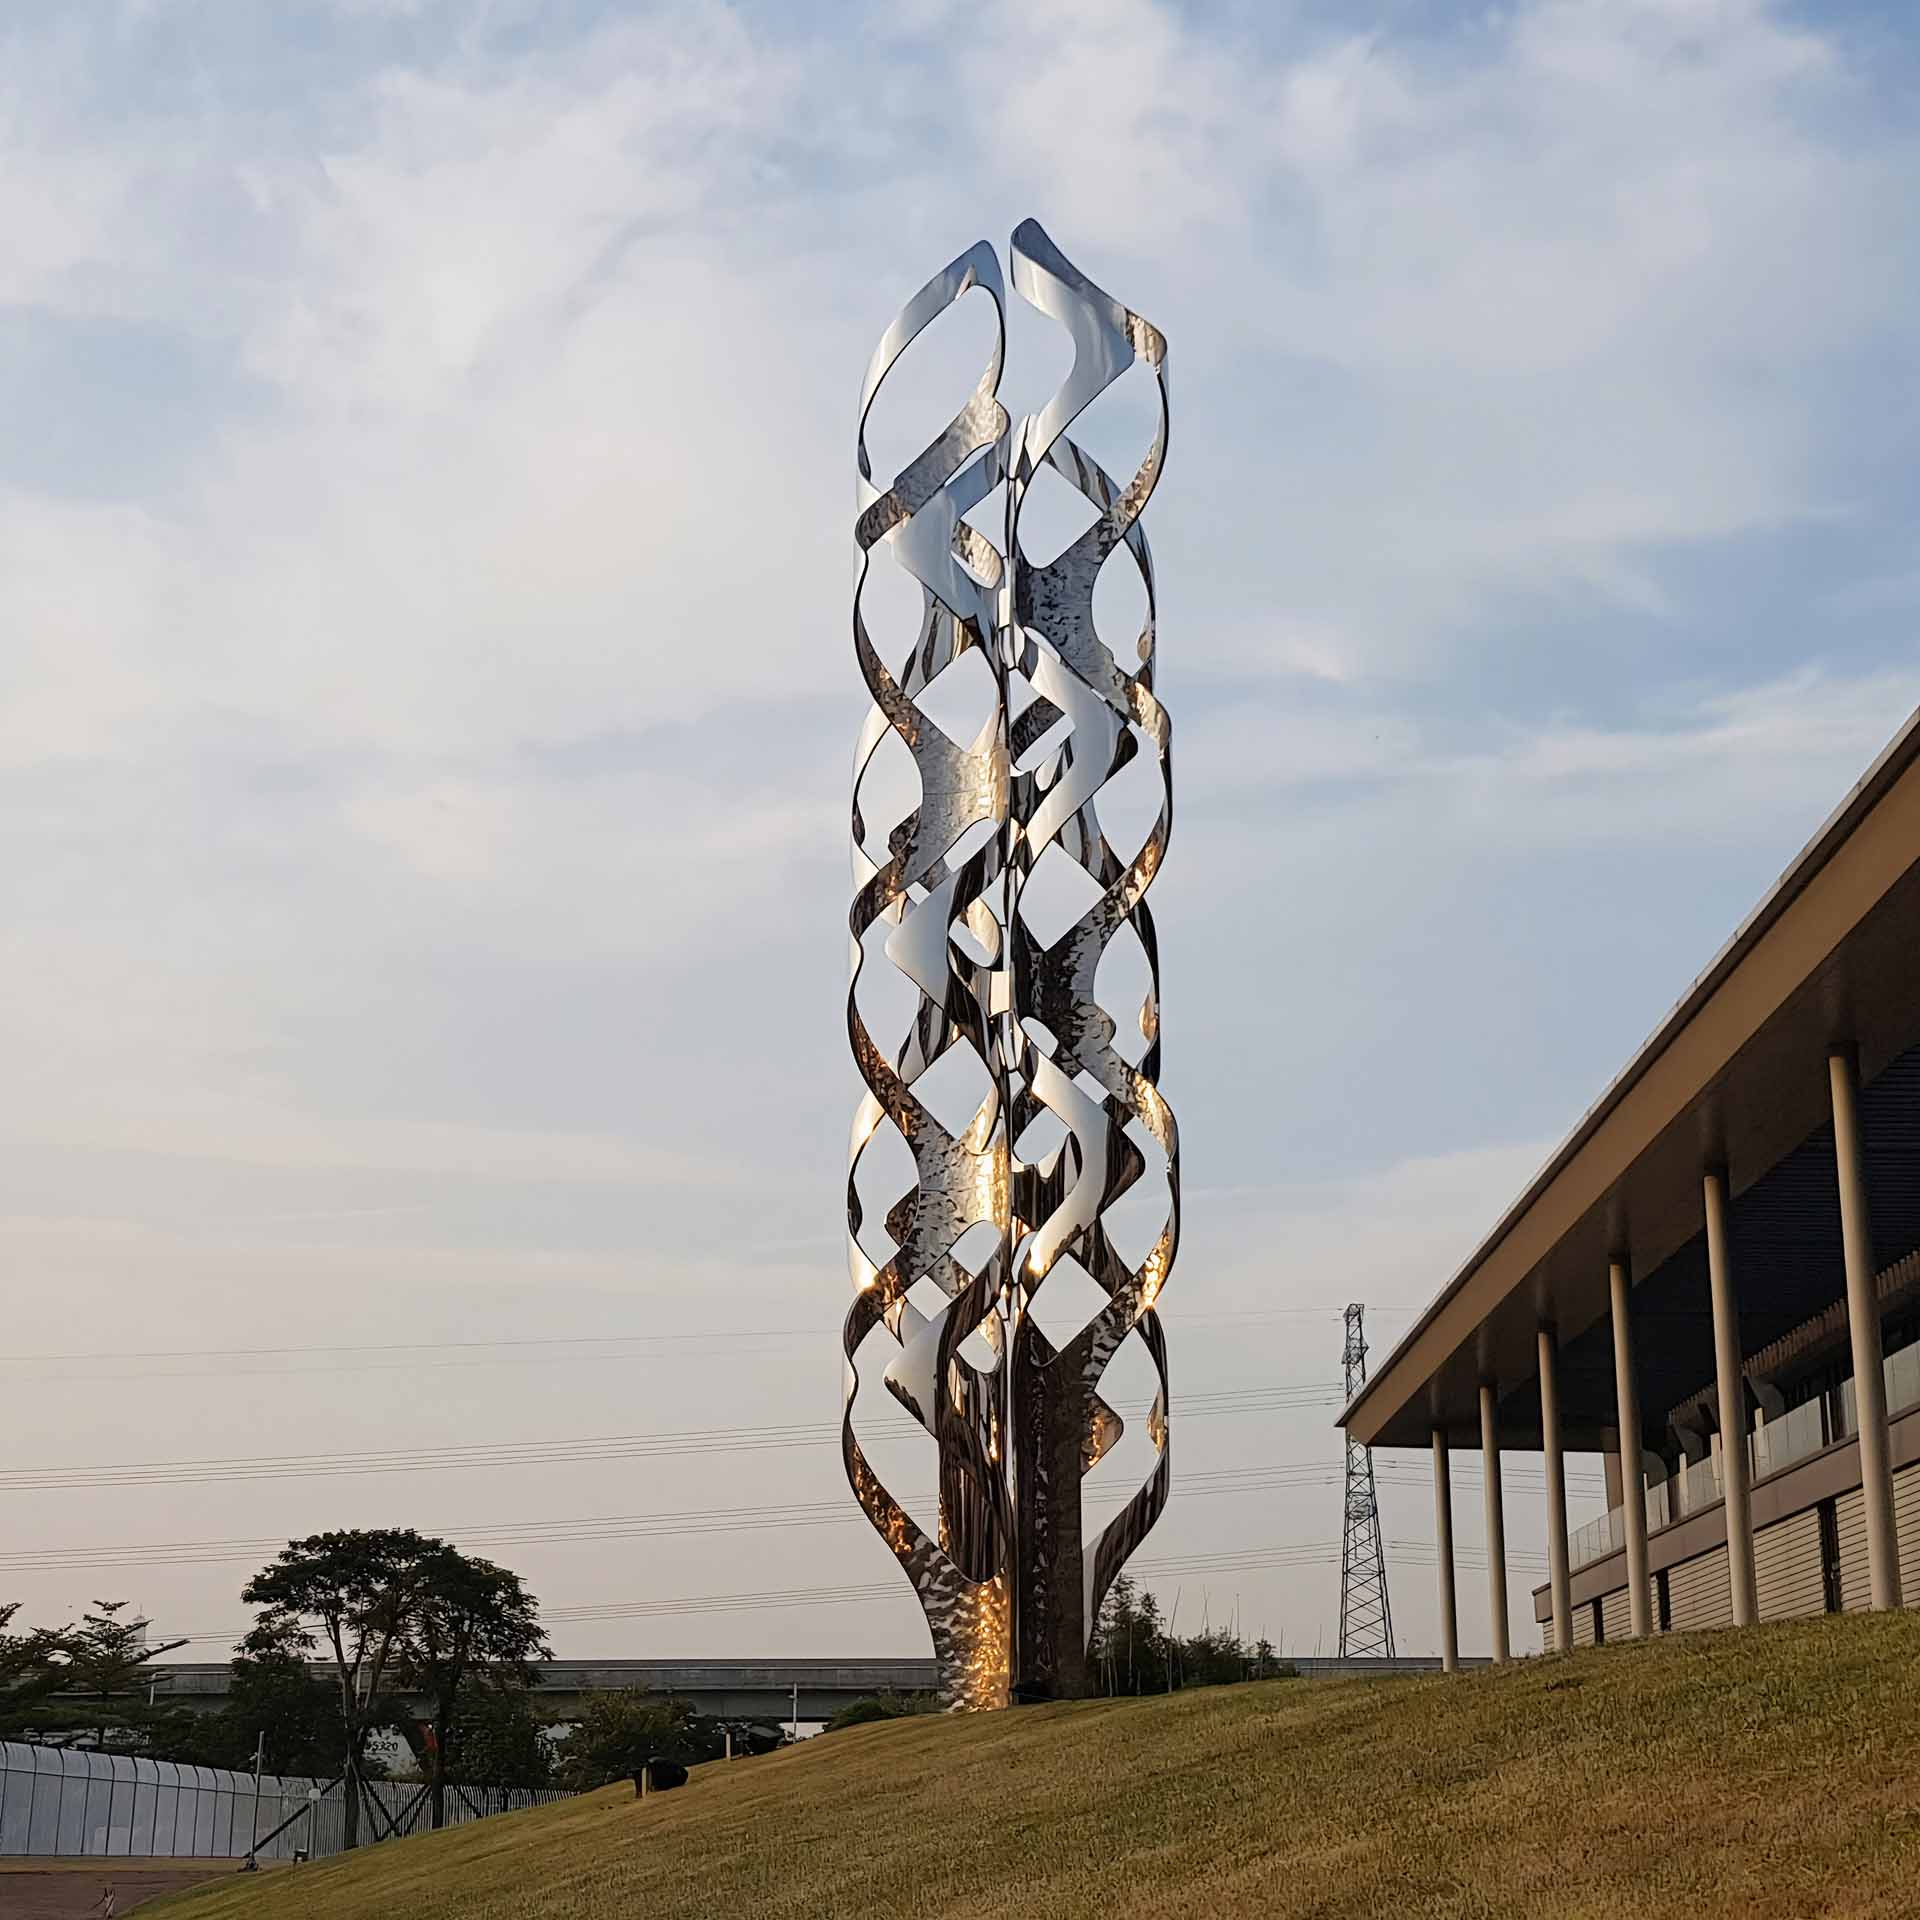 The 10-meter-tall stainless steel sculpture serves as a powerful symbol of a precision metal processing company's core values and vision, while also contributing to the aesthetic appeal of the green square.